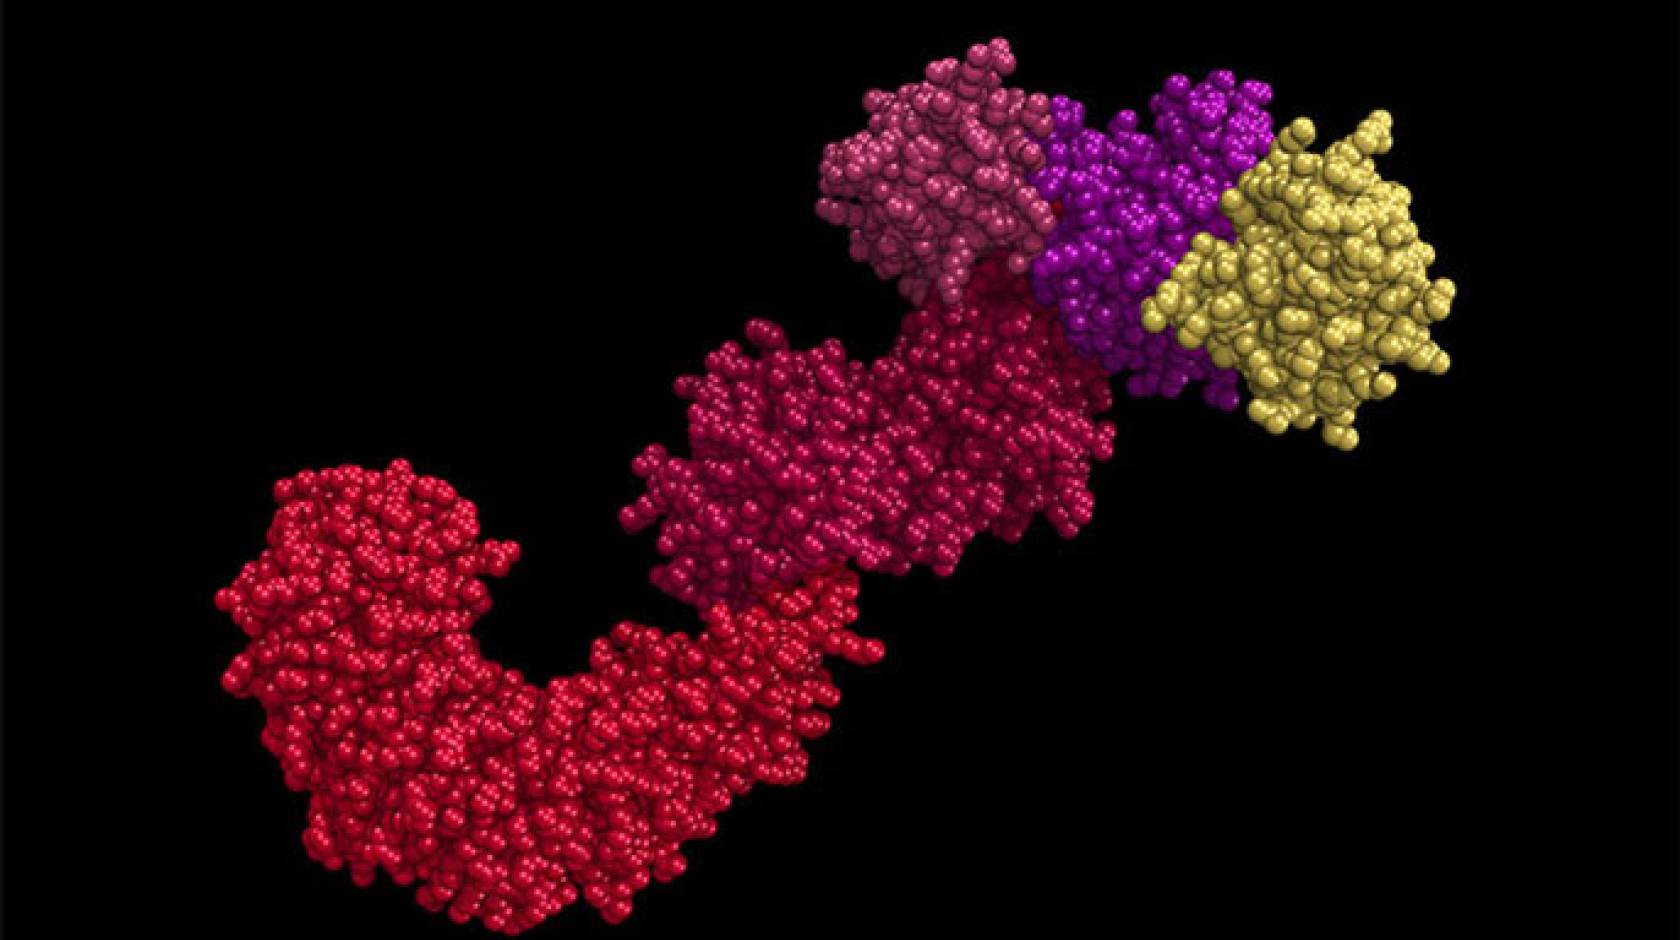 Image of the NLRP3 protein